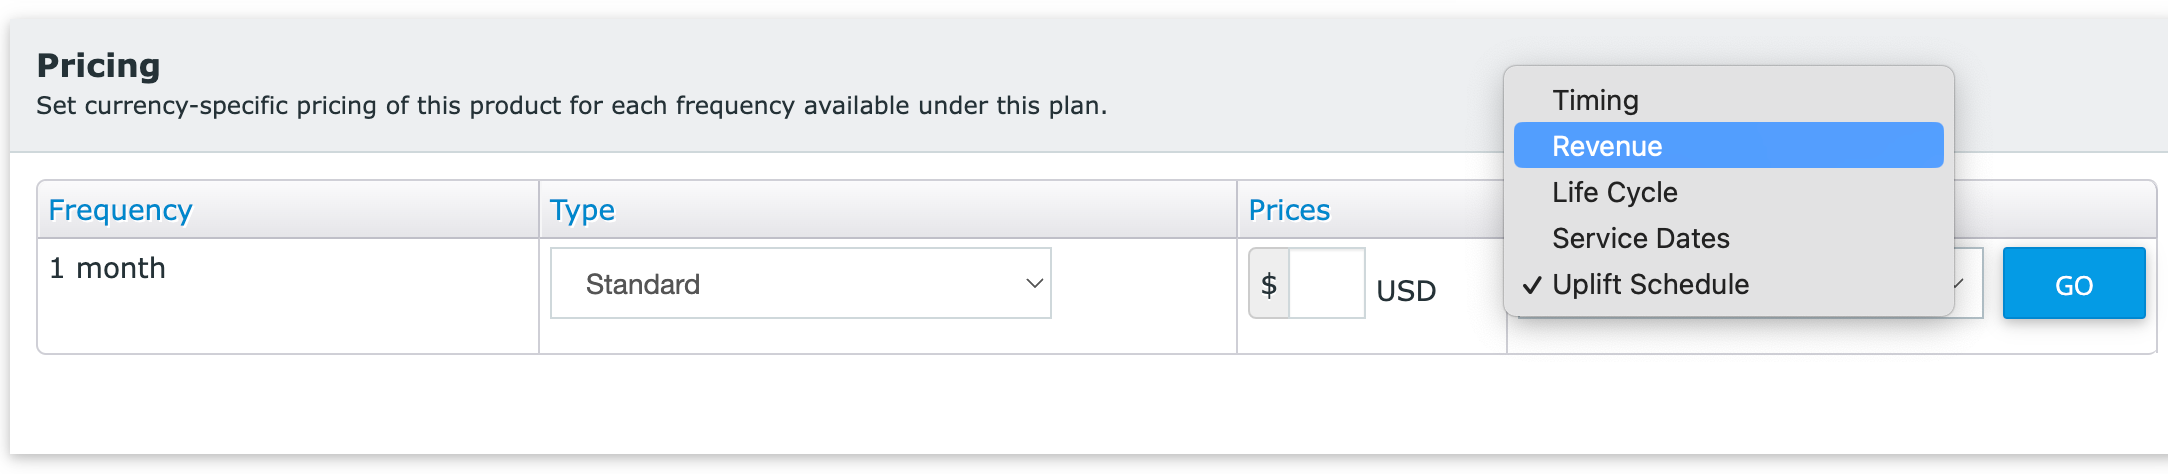 Advancedpricing.png